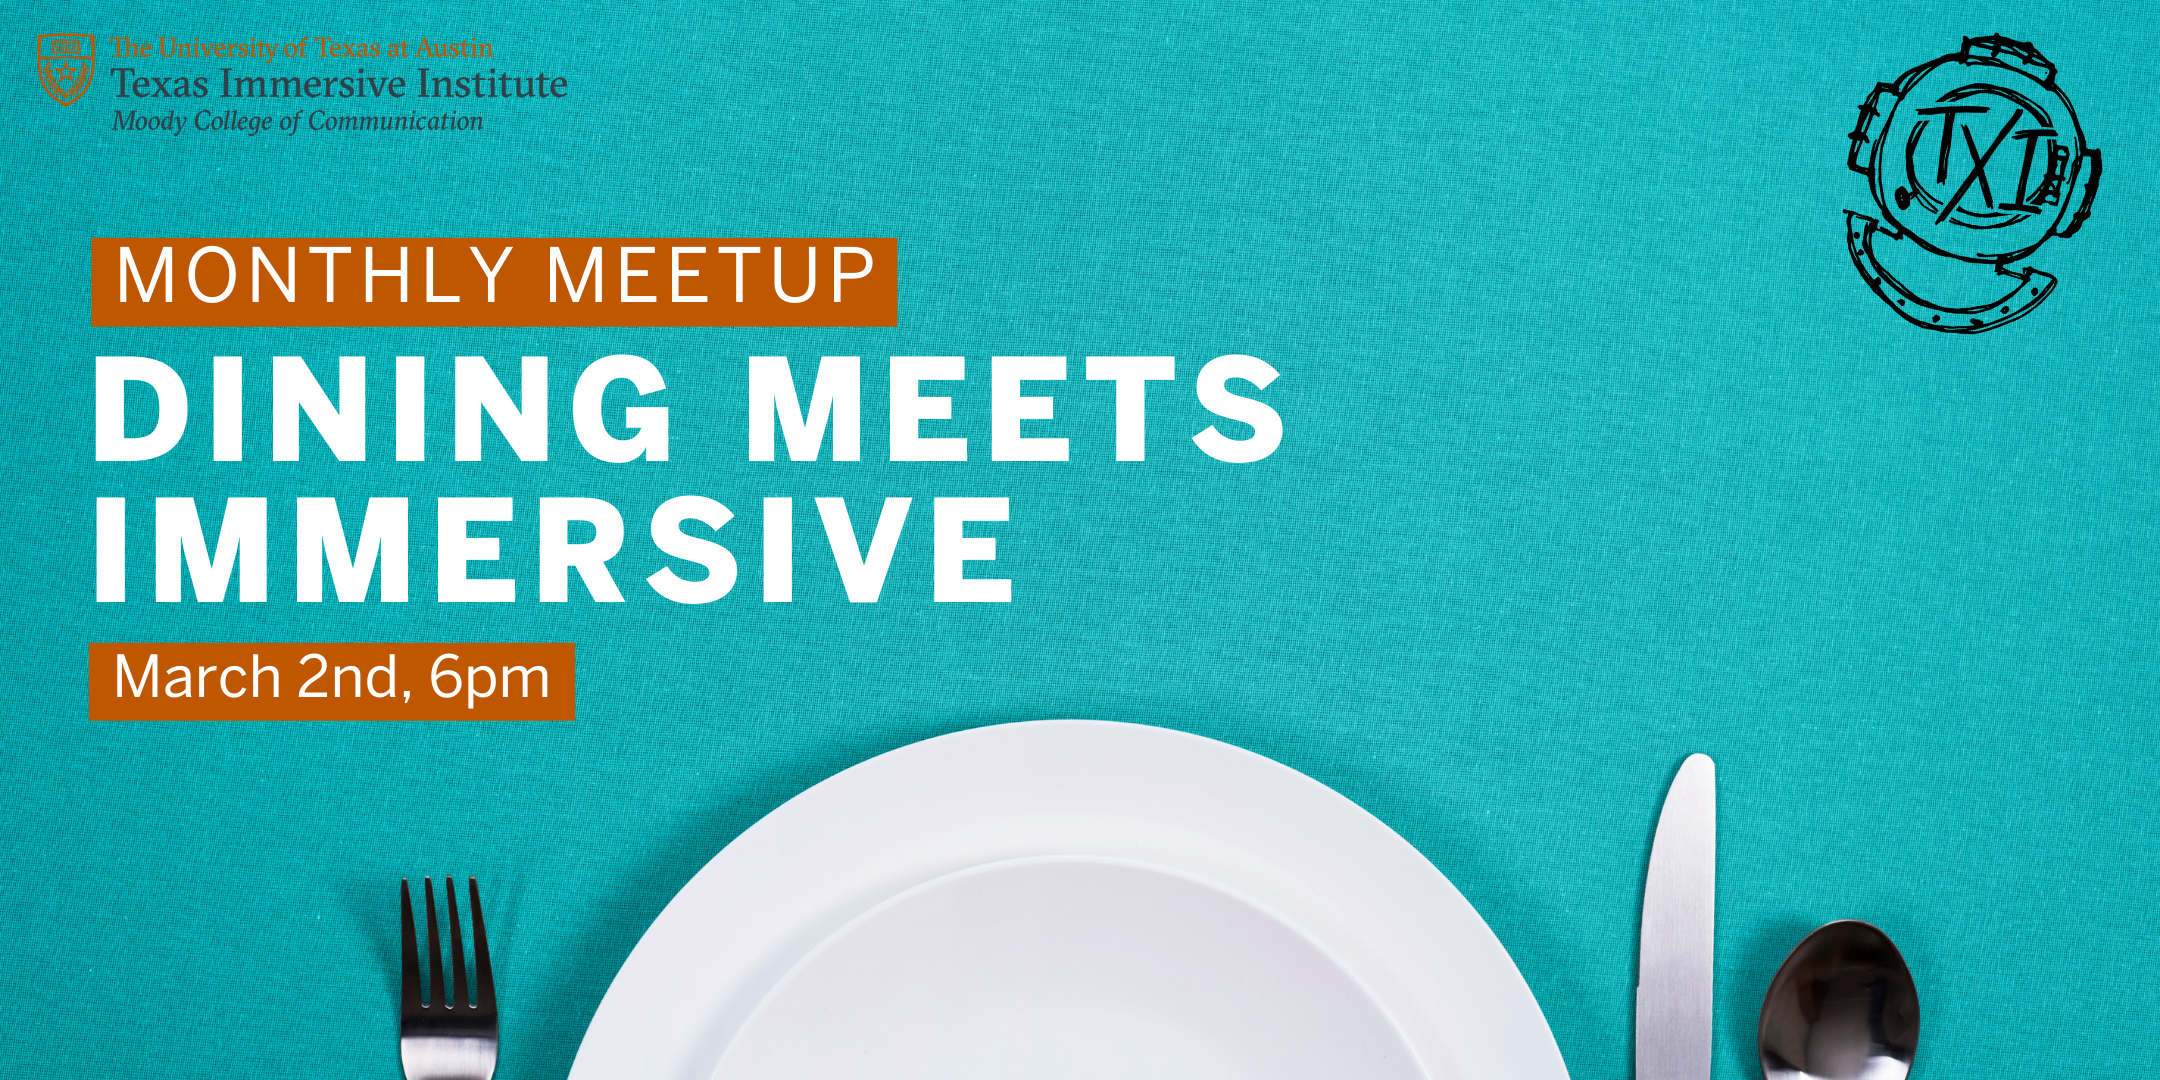 Dining Meets Immersive TXI MeetUP. Click here to Sign Up